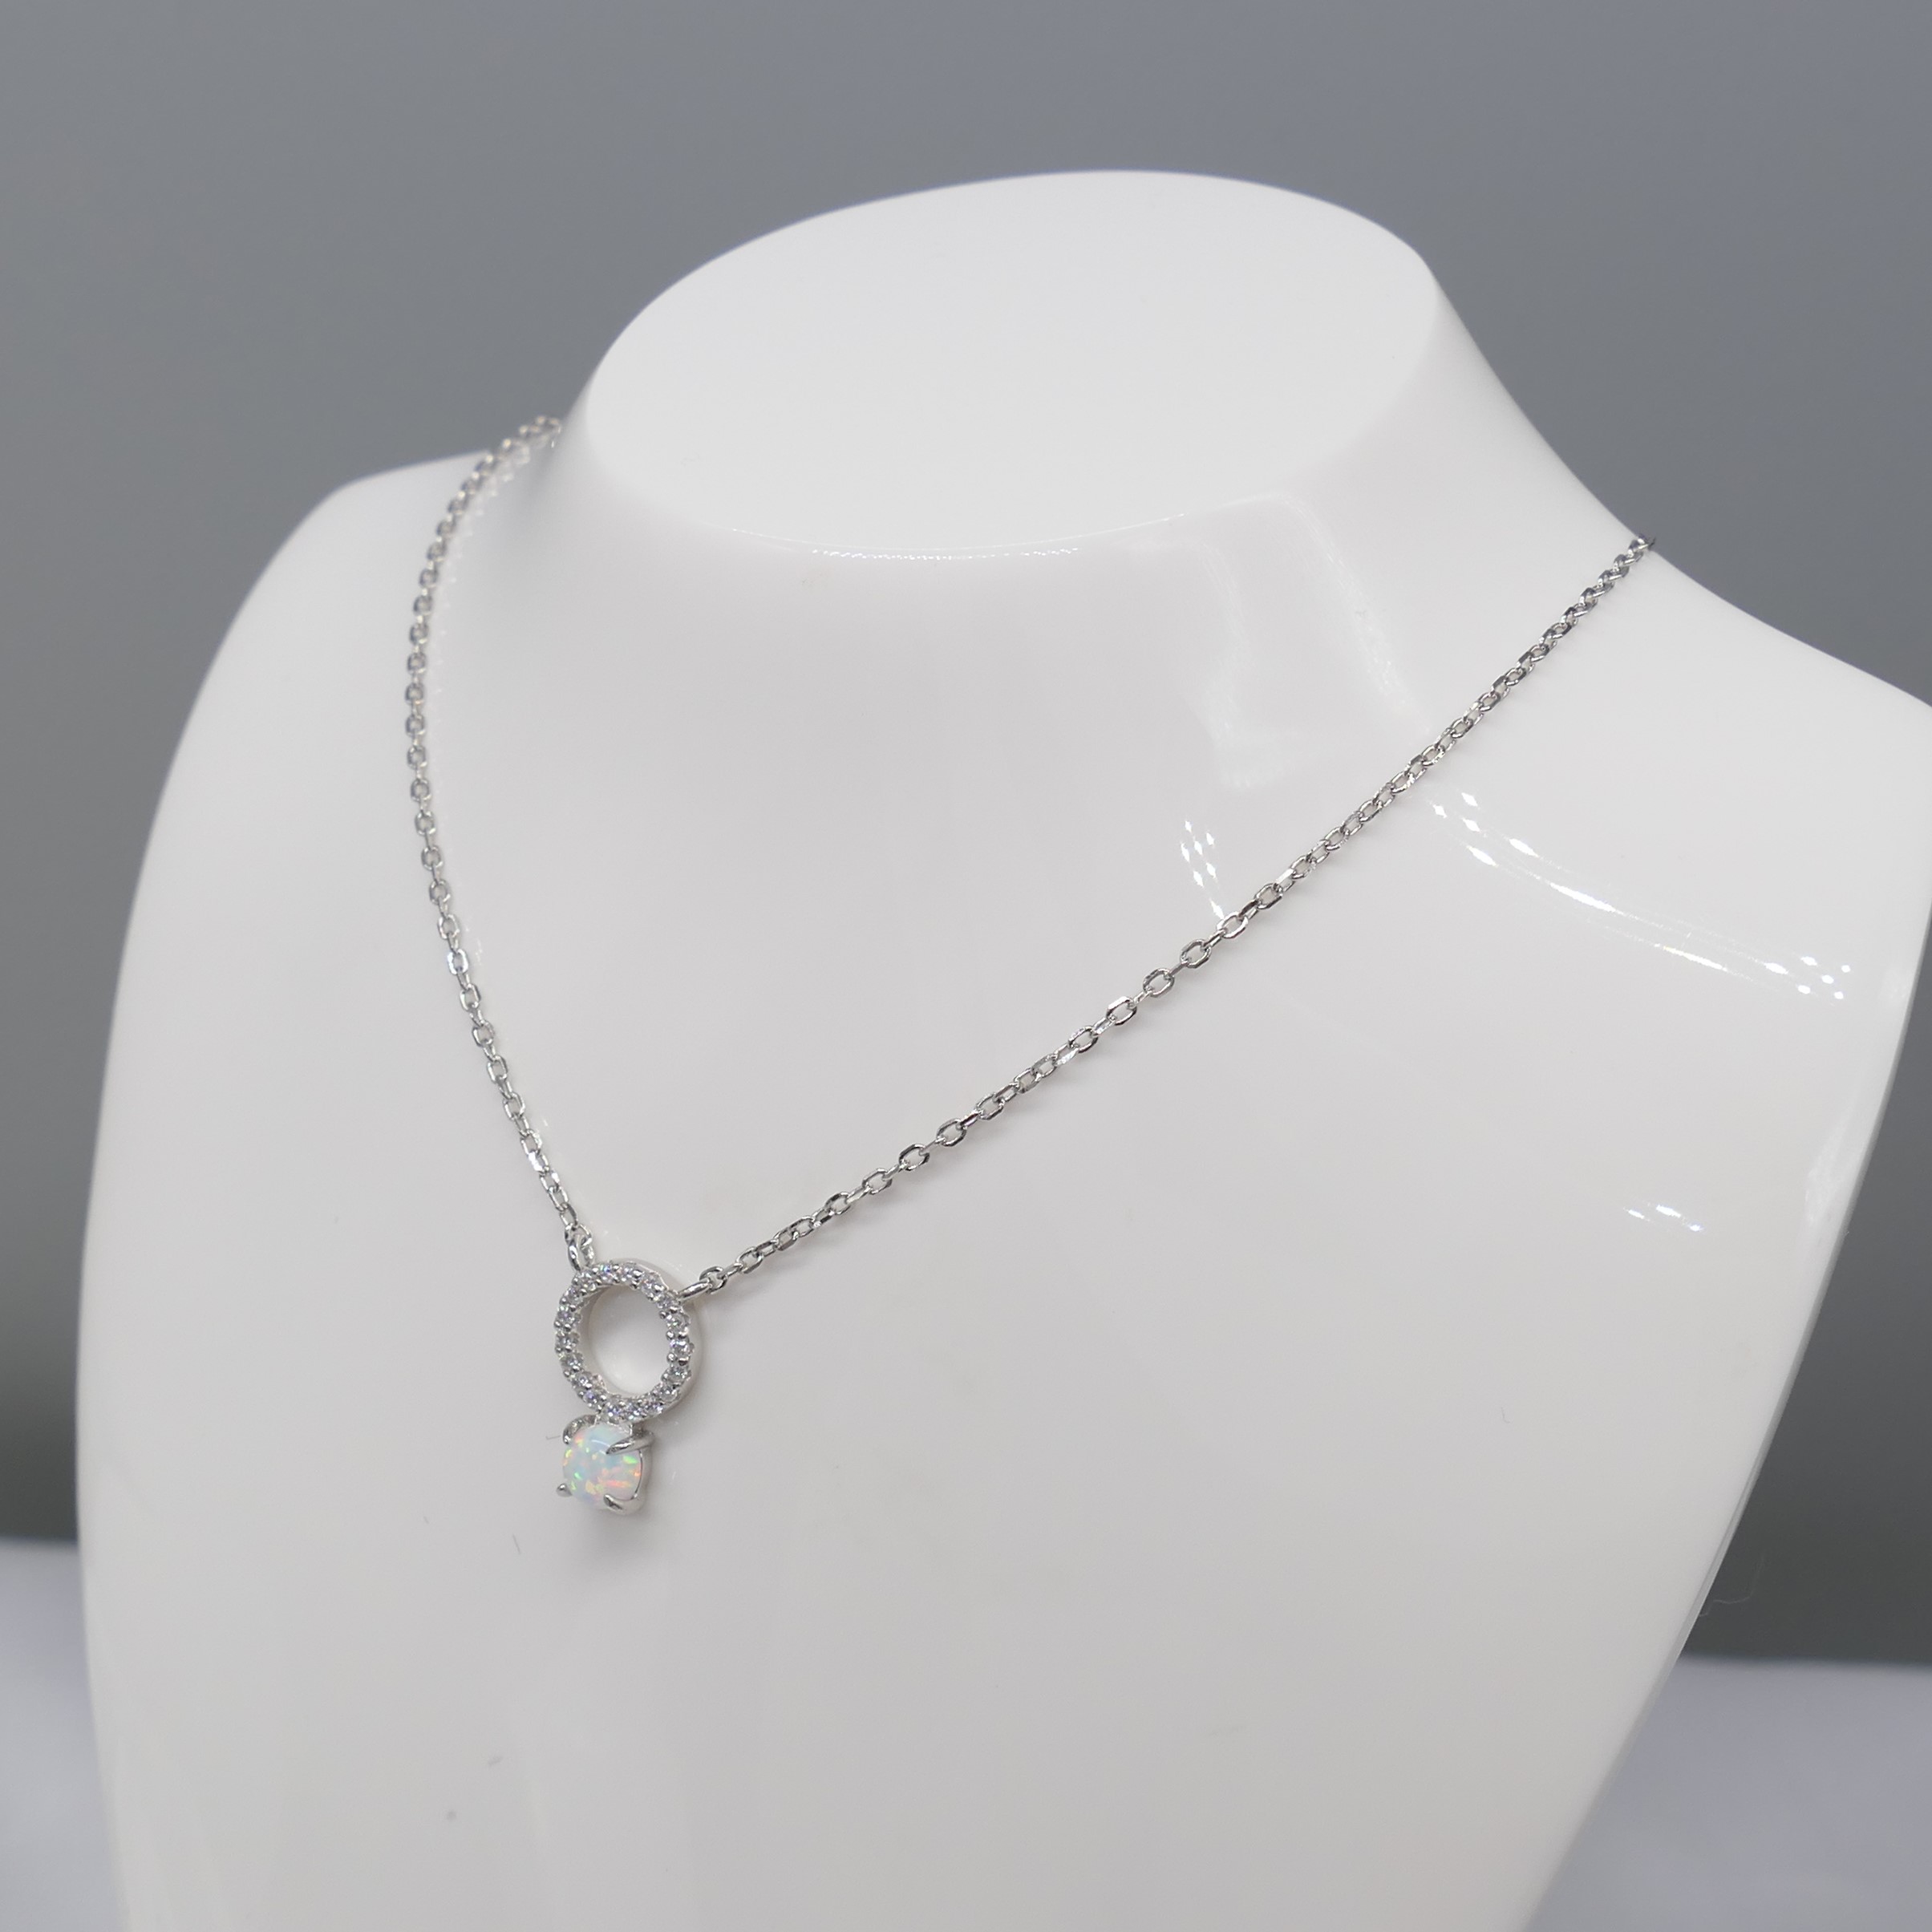 Cabochon Opalite Gemstone and White Cubic Zirconia Halo Silver Necklace - Image 6 of 6